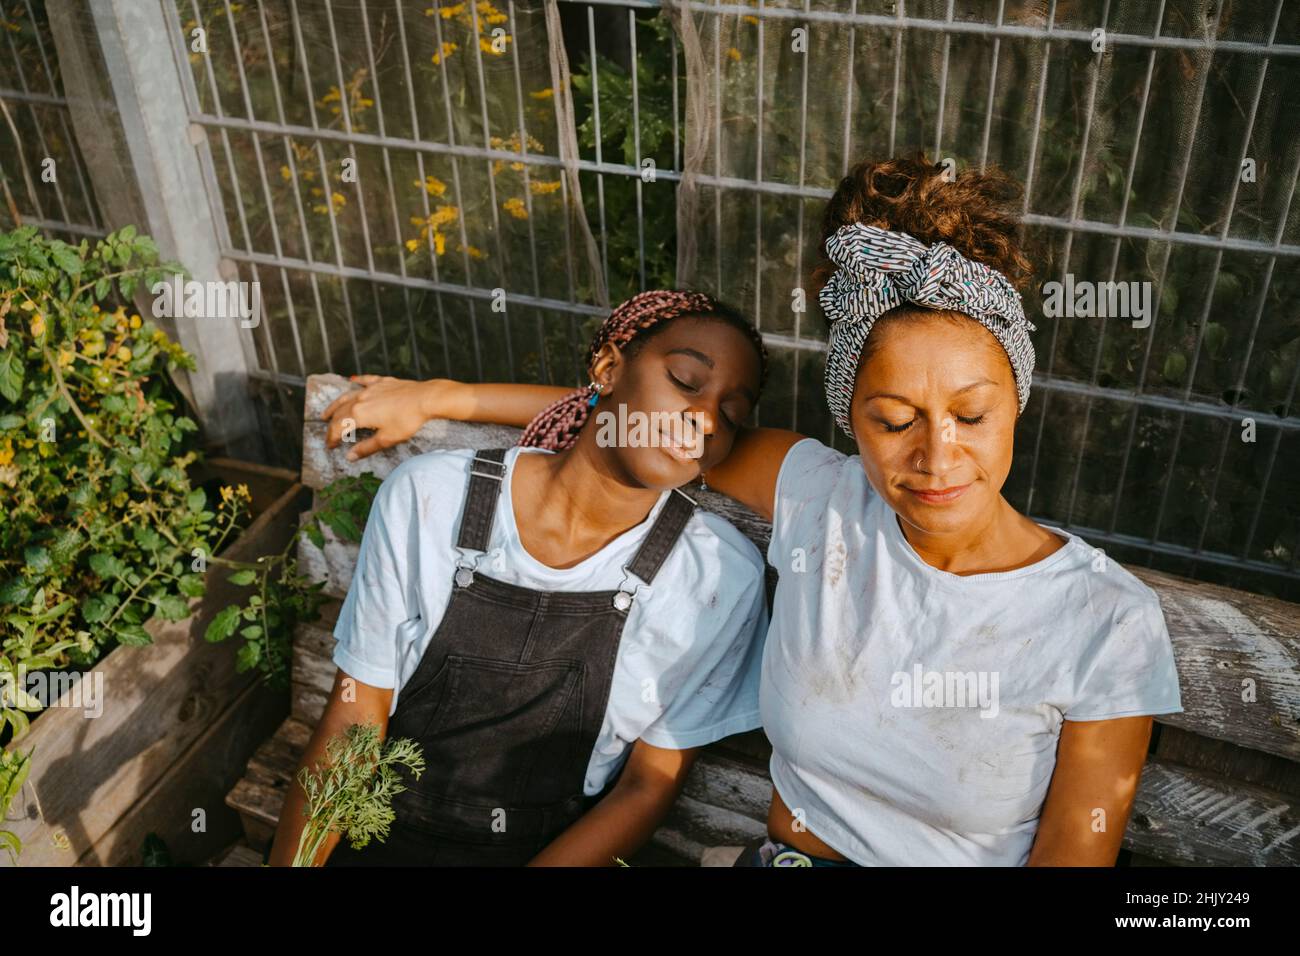 Female volunteers with eyes closed relaxing at community garden Stock Photo